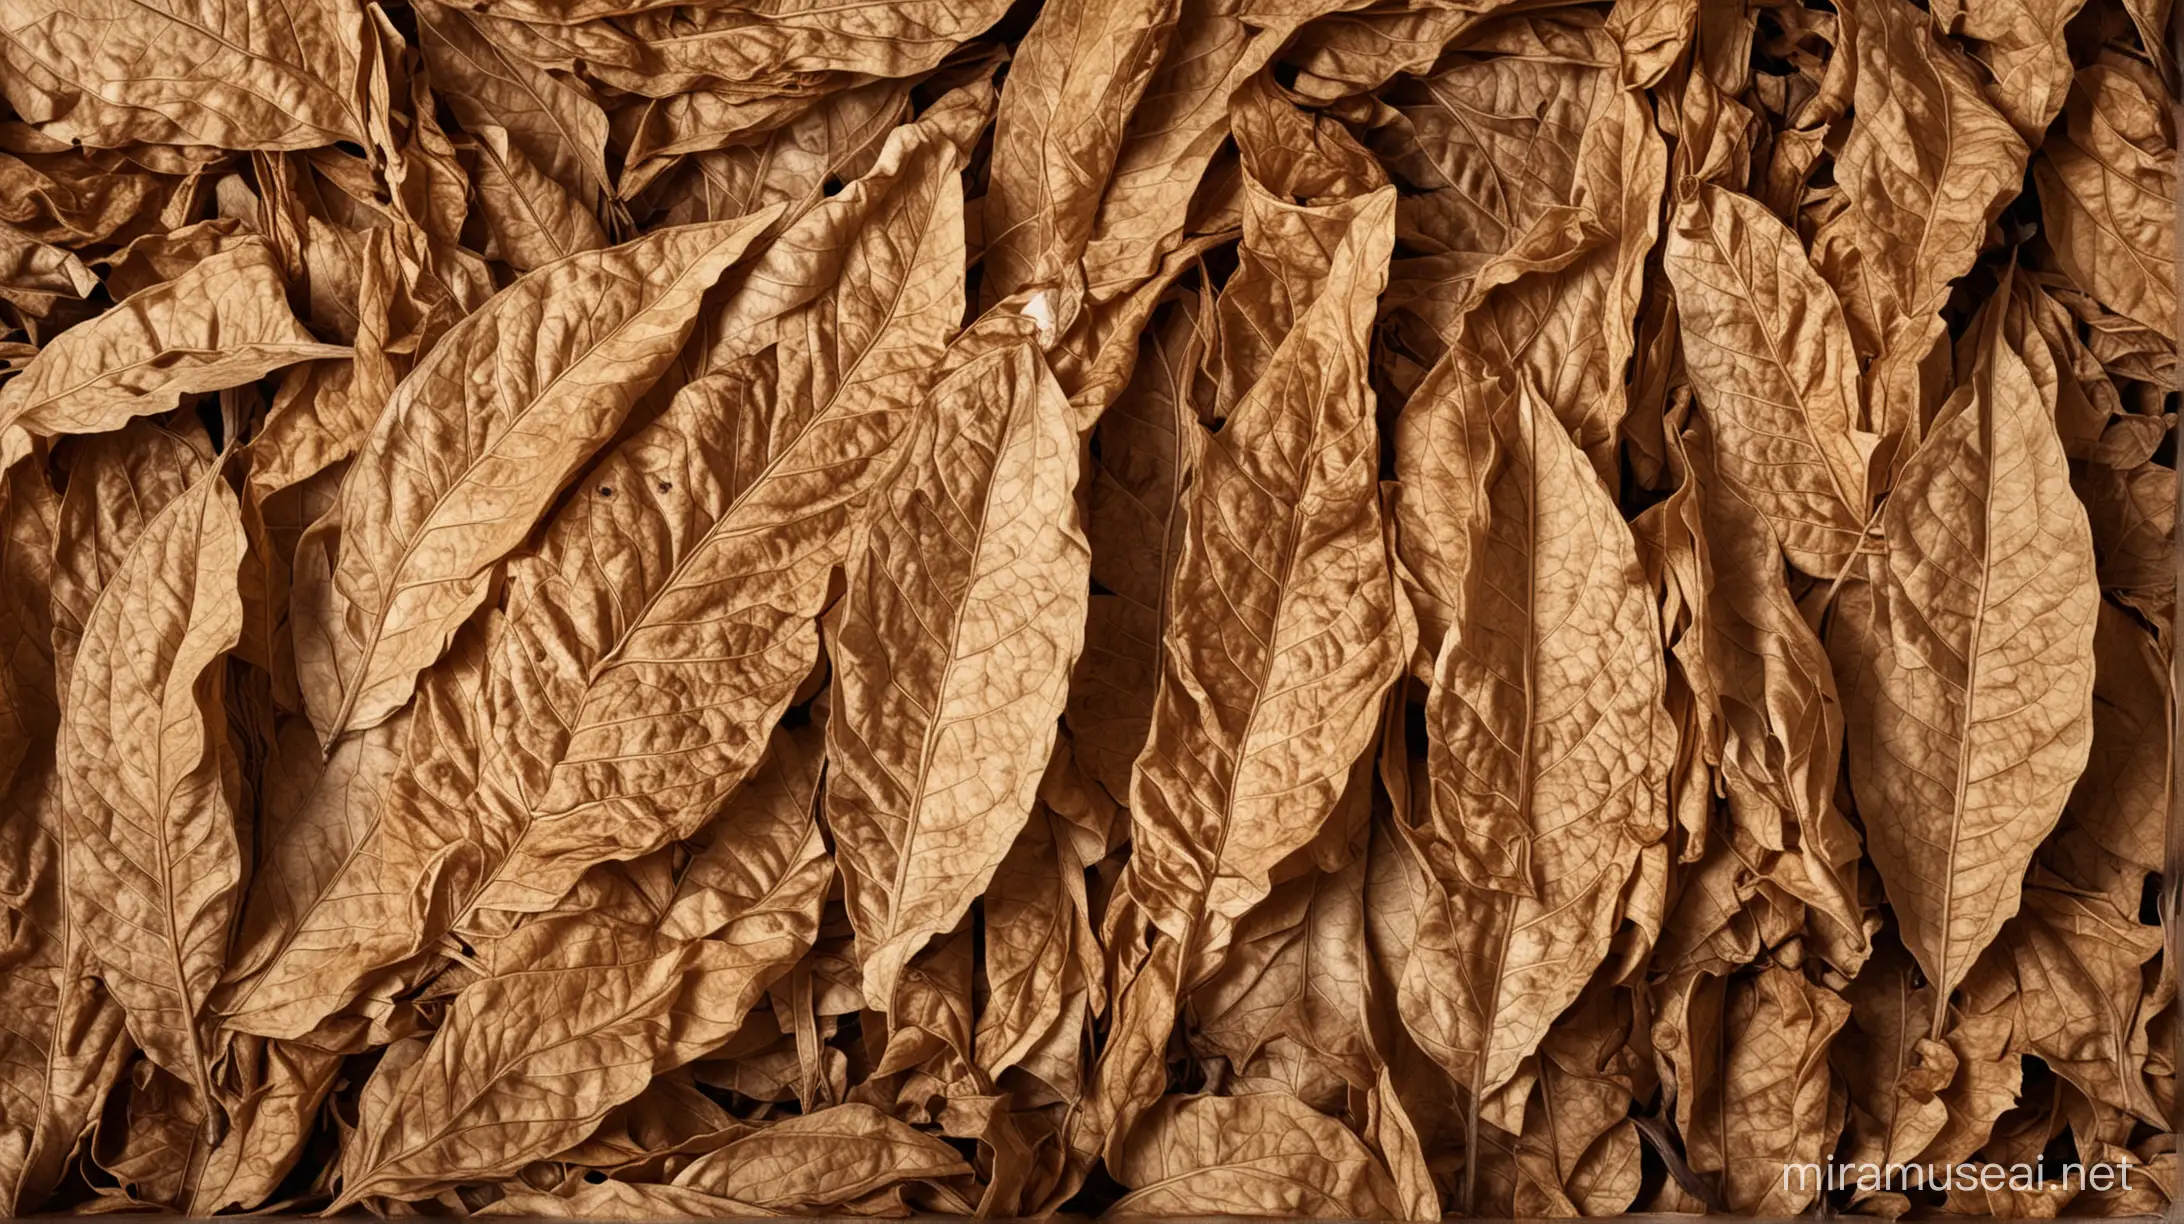 dry tobacco leaf, balck and white, manufacturing